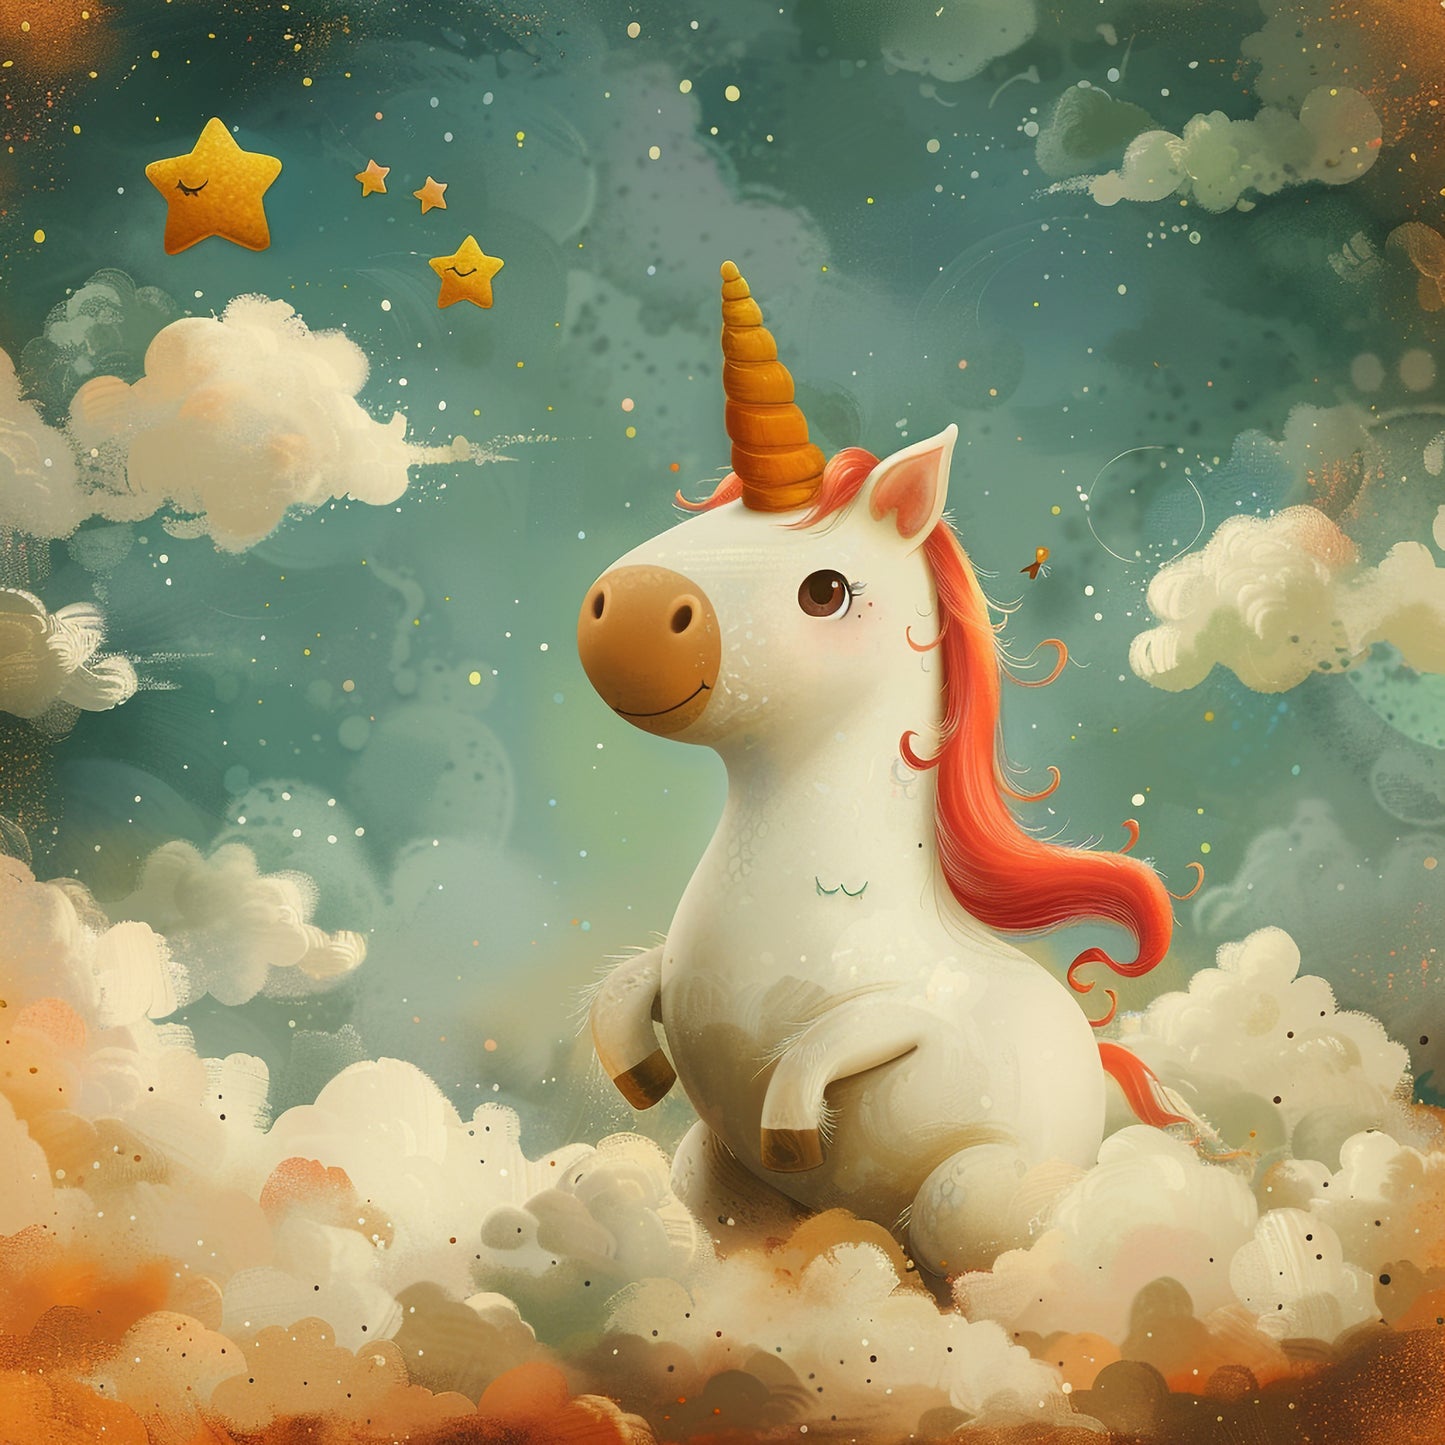 Adorable Unicorn among Fluffy Clouds with Golden Stars